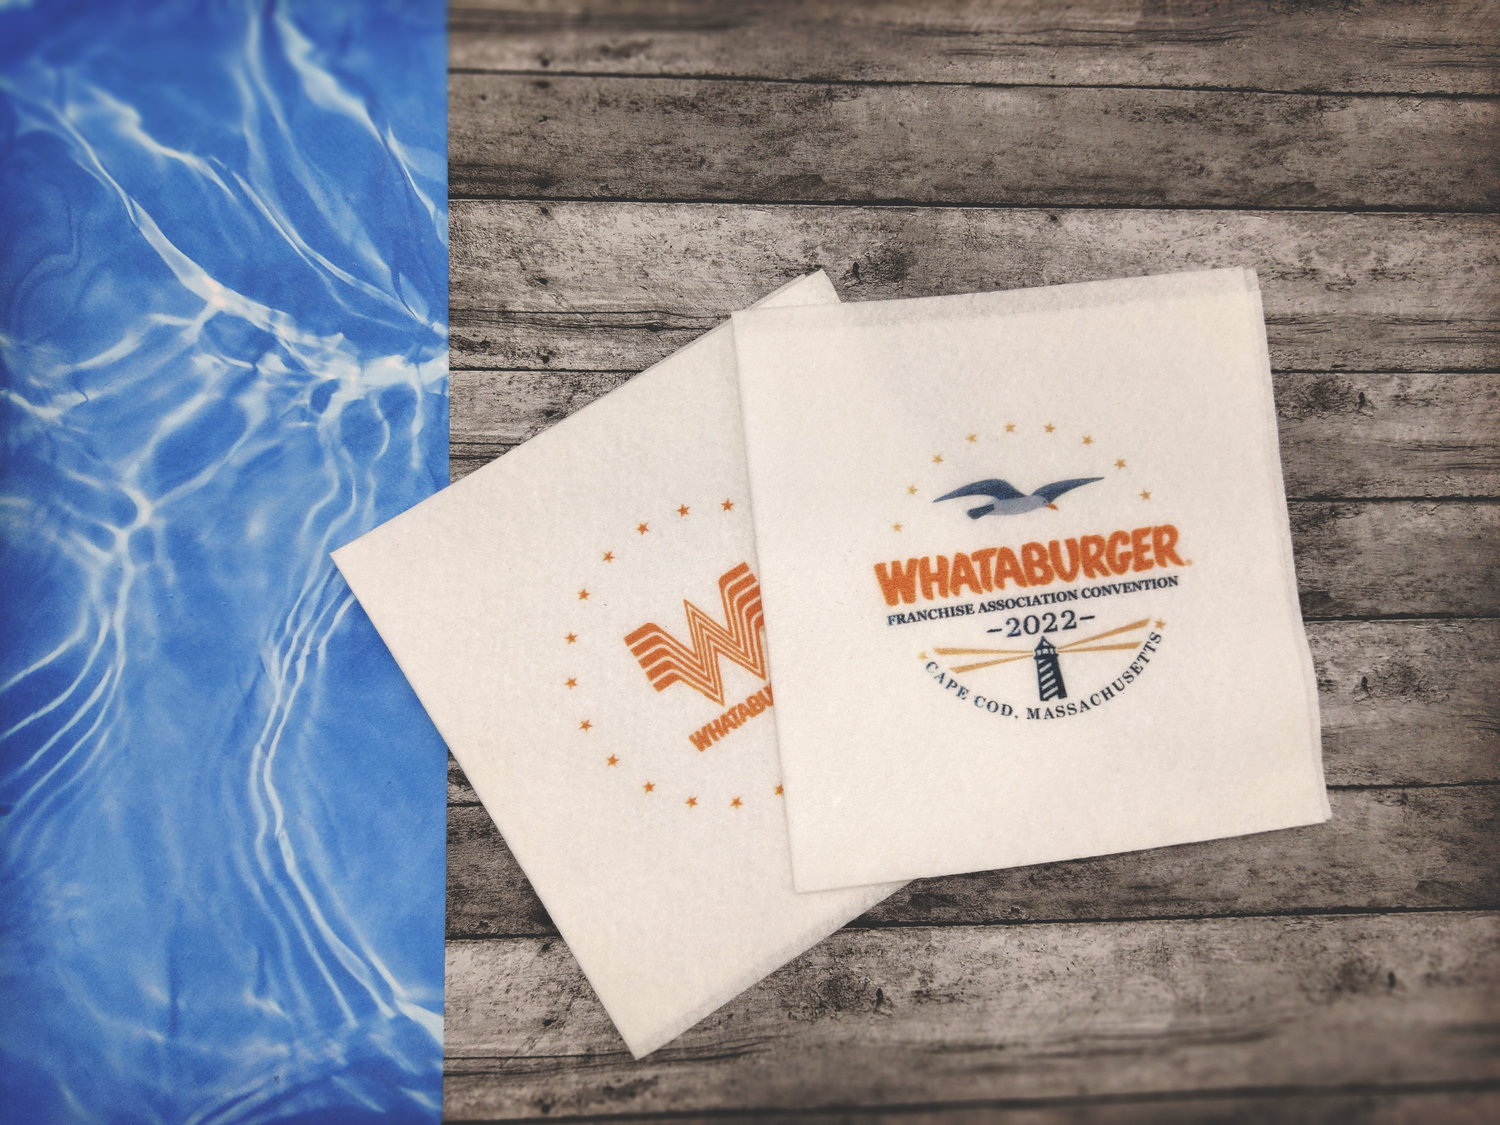 A wooden pier above clear blue water. Two napkins lay on top with one reading "Whataburger Franchise Association Convention 2022" written above a lighthouse, and under a seagull. The second napkin underneath is the Whataburger logo in a circle of stars.